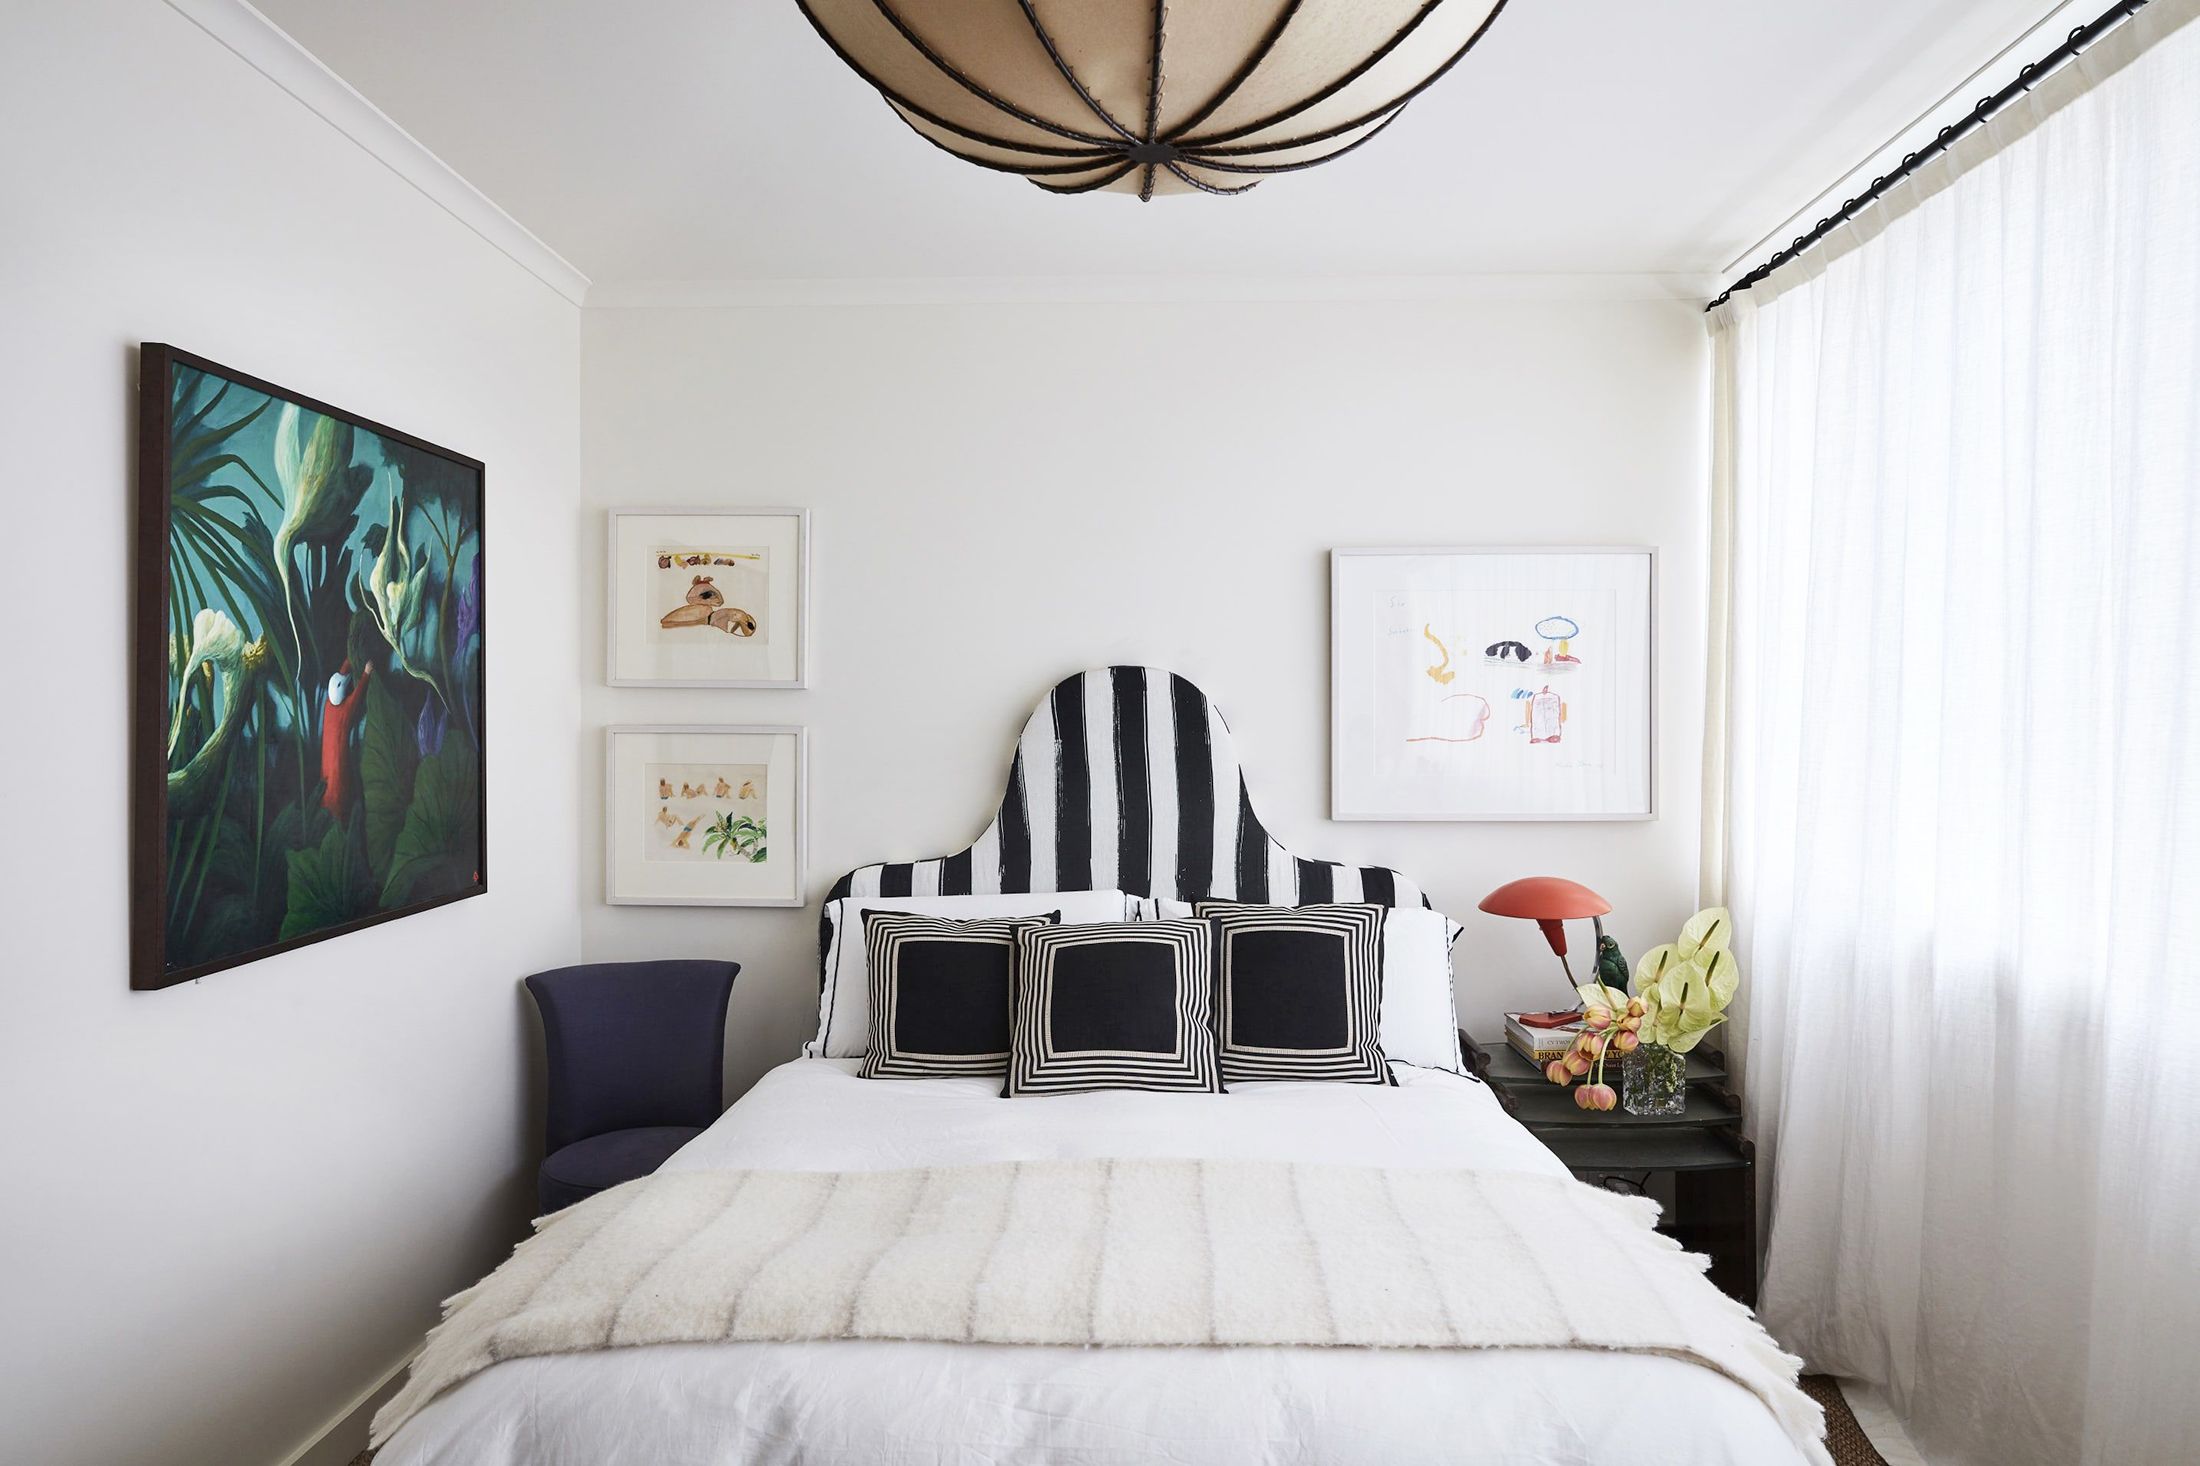 13 Spectacular Ways to Decorate the Wall Behind the Bed